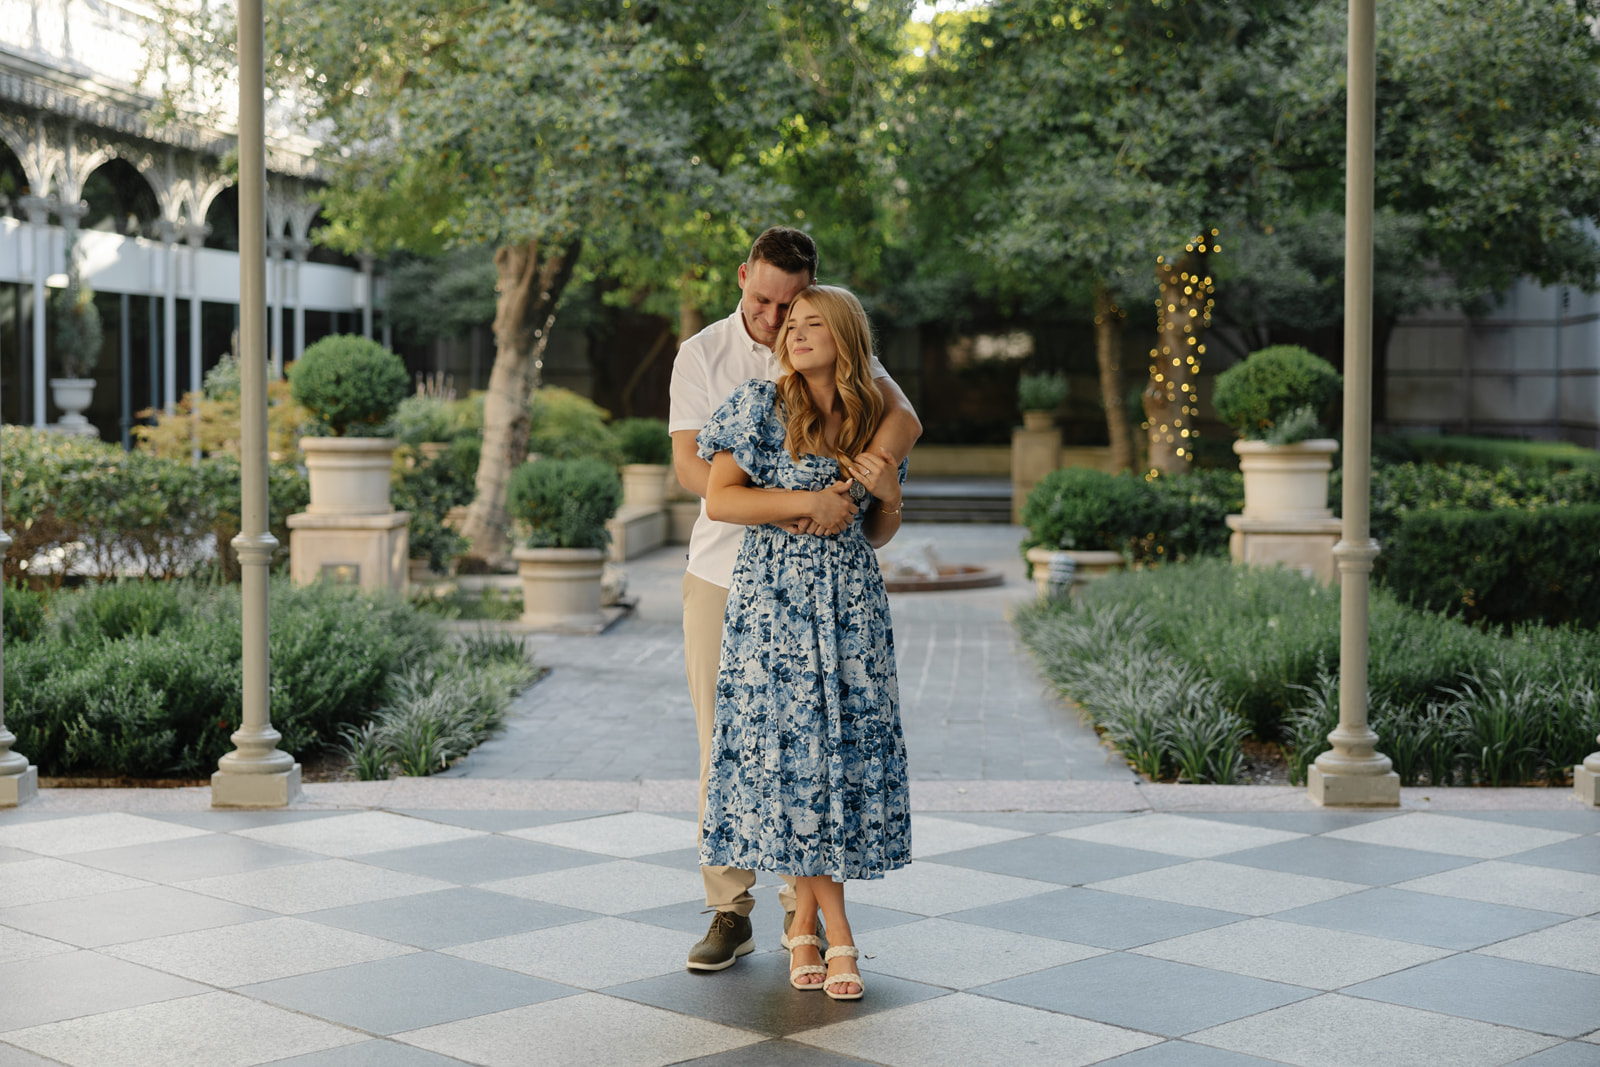 Timeless elegant downtown engagements at the Adolphus Hotel in Dallas Texas.